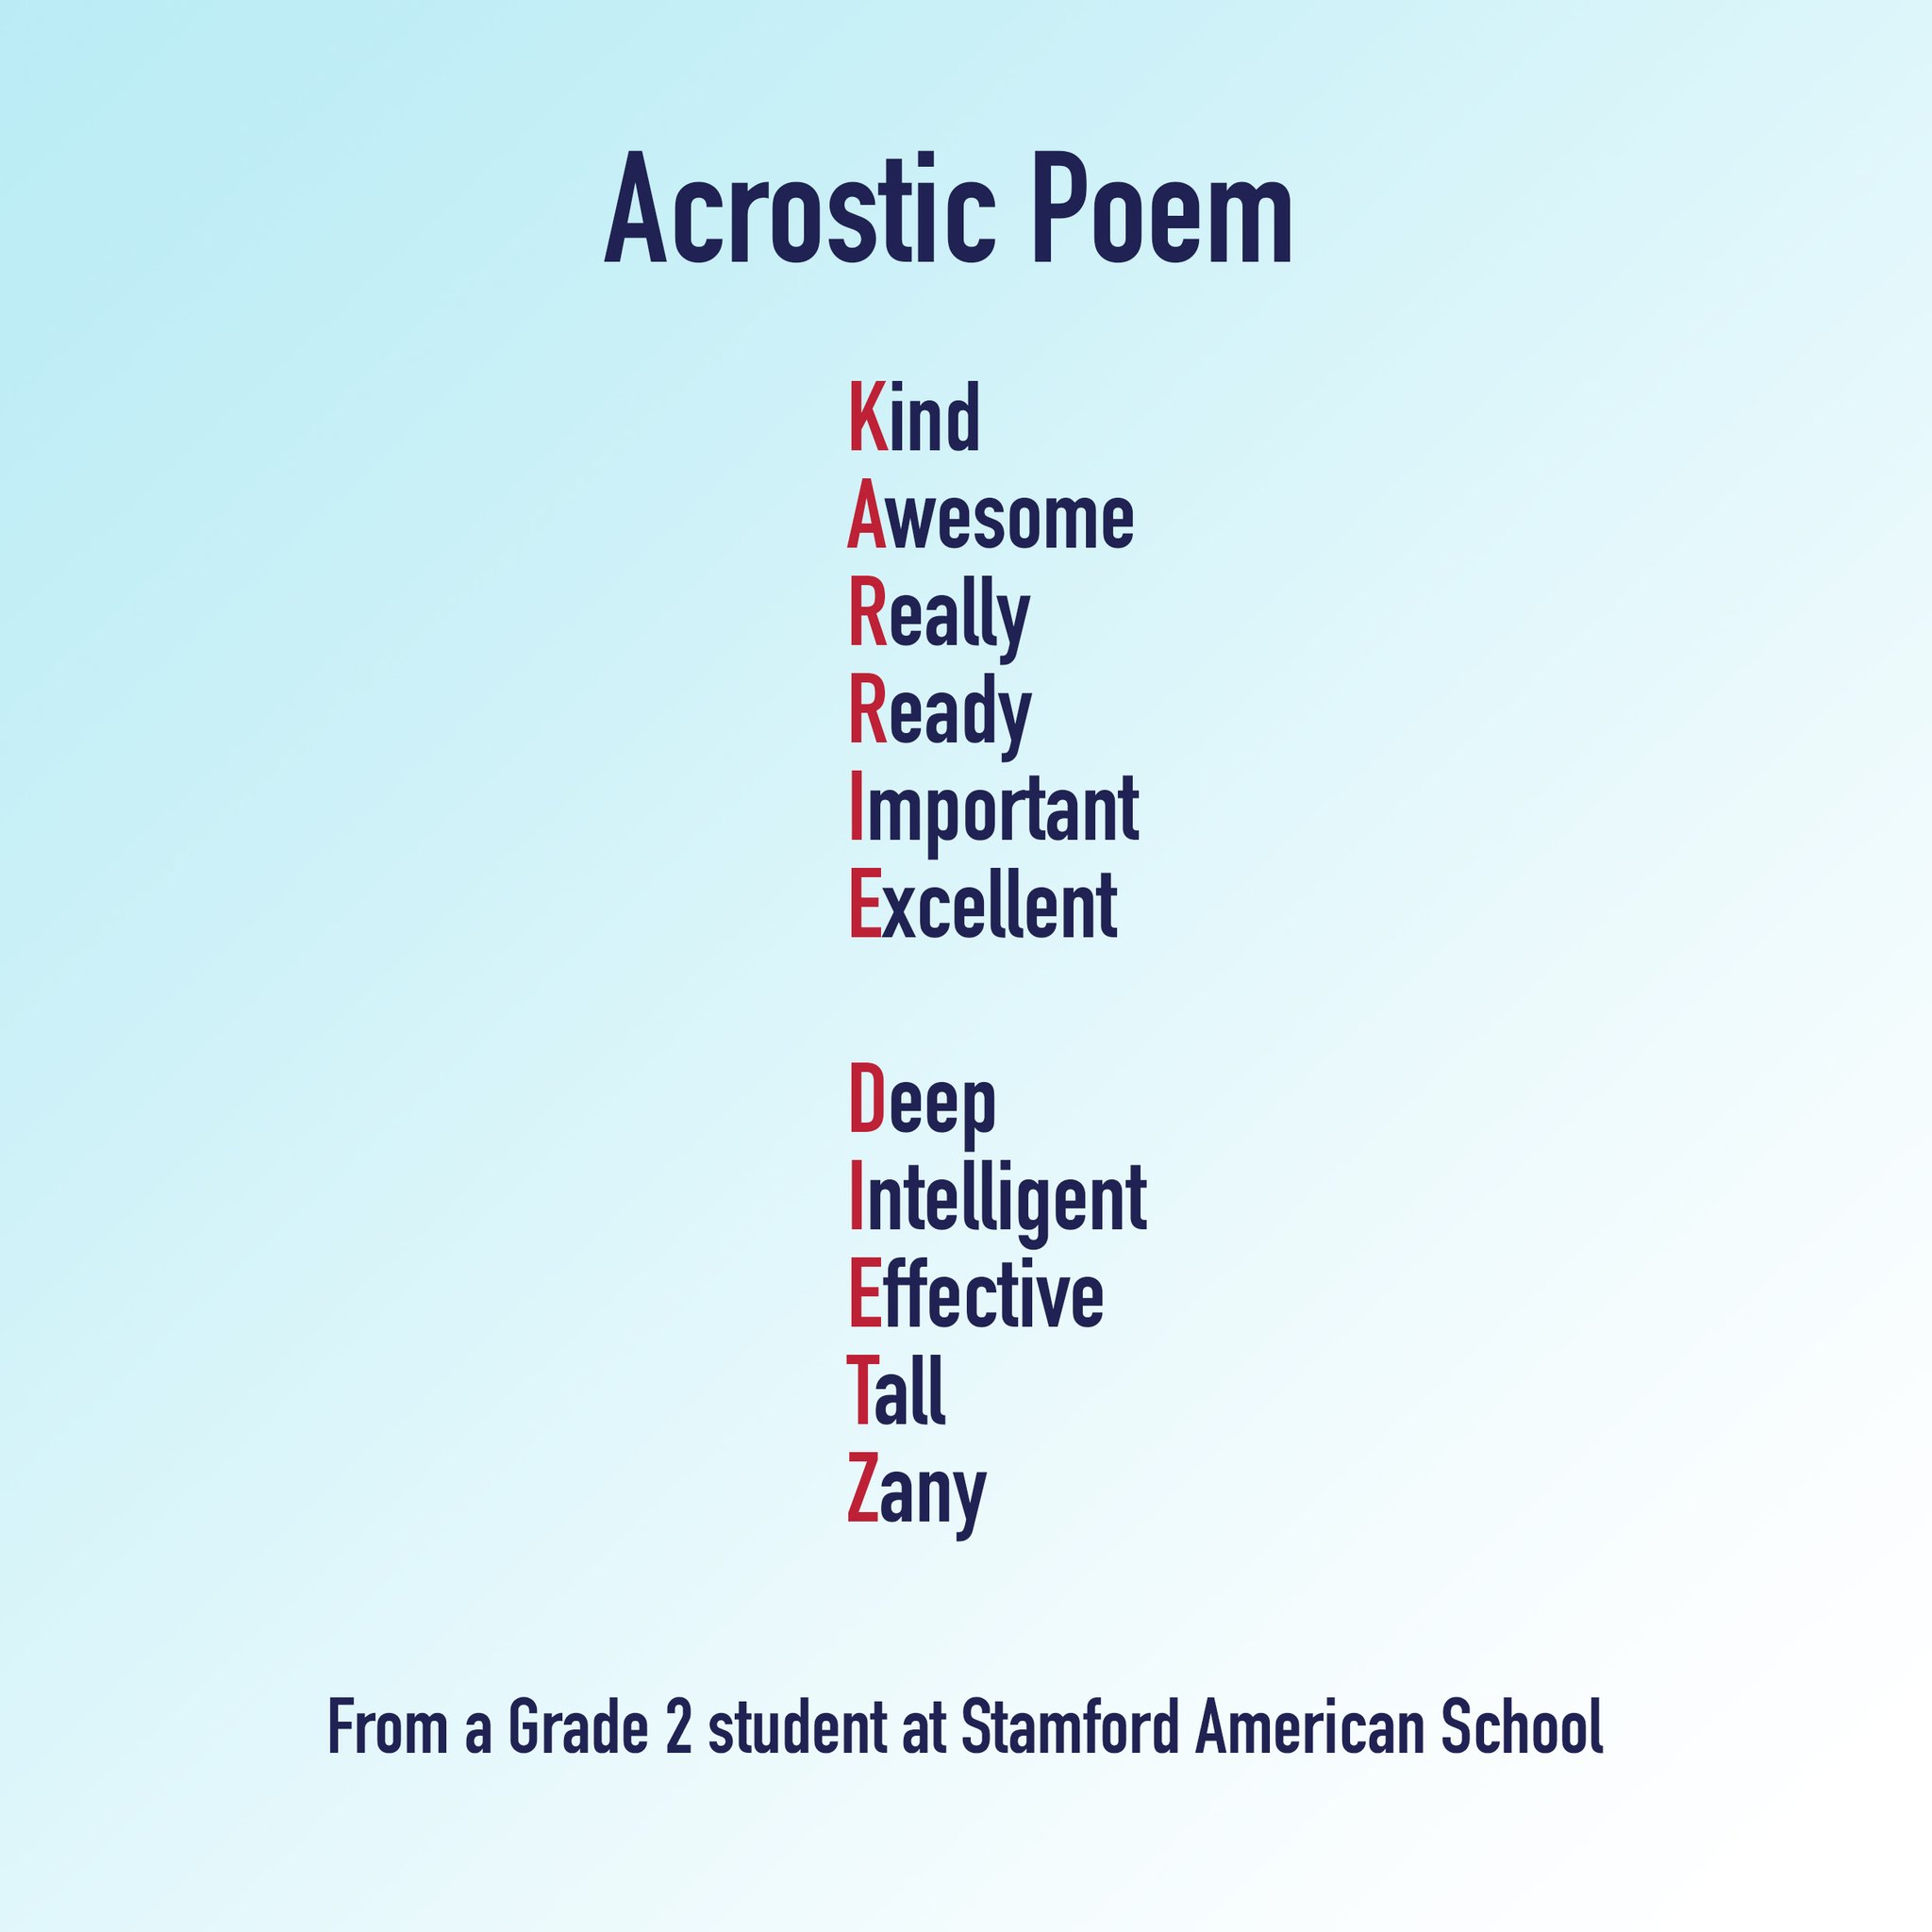 Stamford American School Hong Kong We Were Delighted To Host An Online Poetry Workshop With Sarah Brennan Yesterday During The Session She Introduced Children To A Number Of Different Poetry